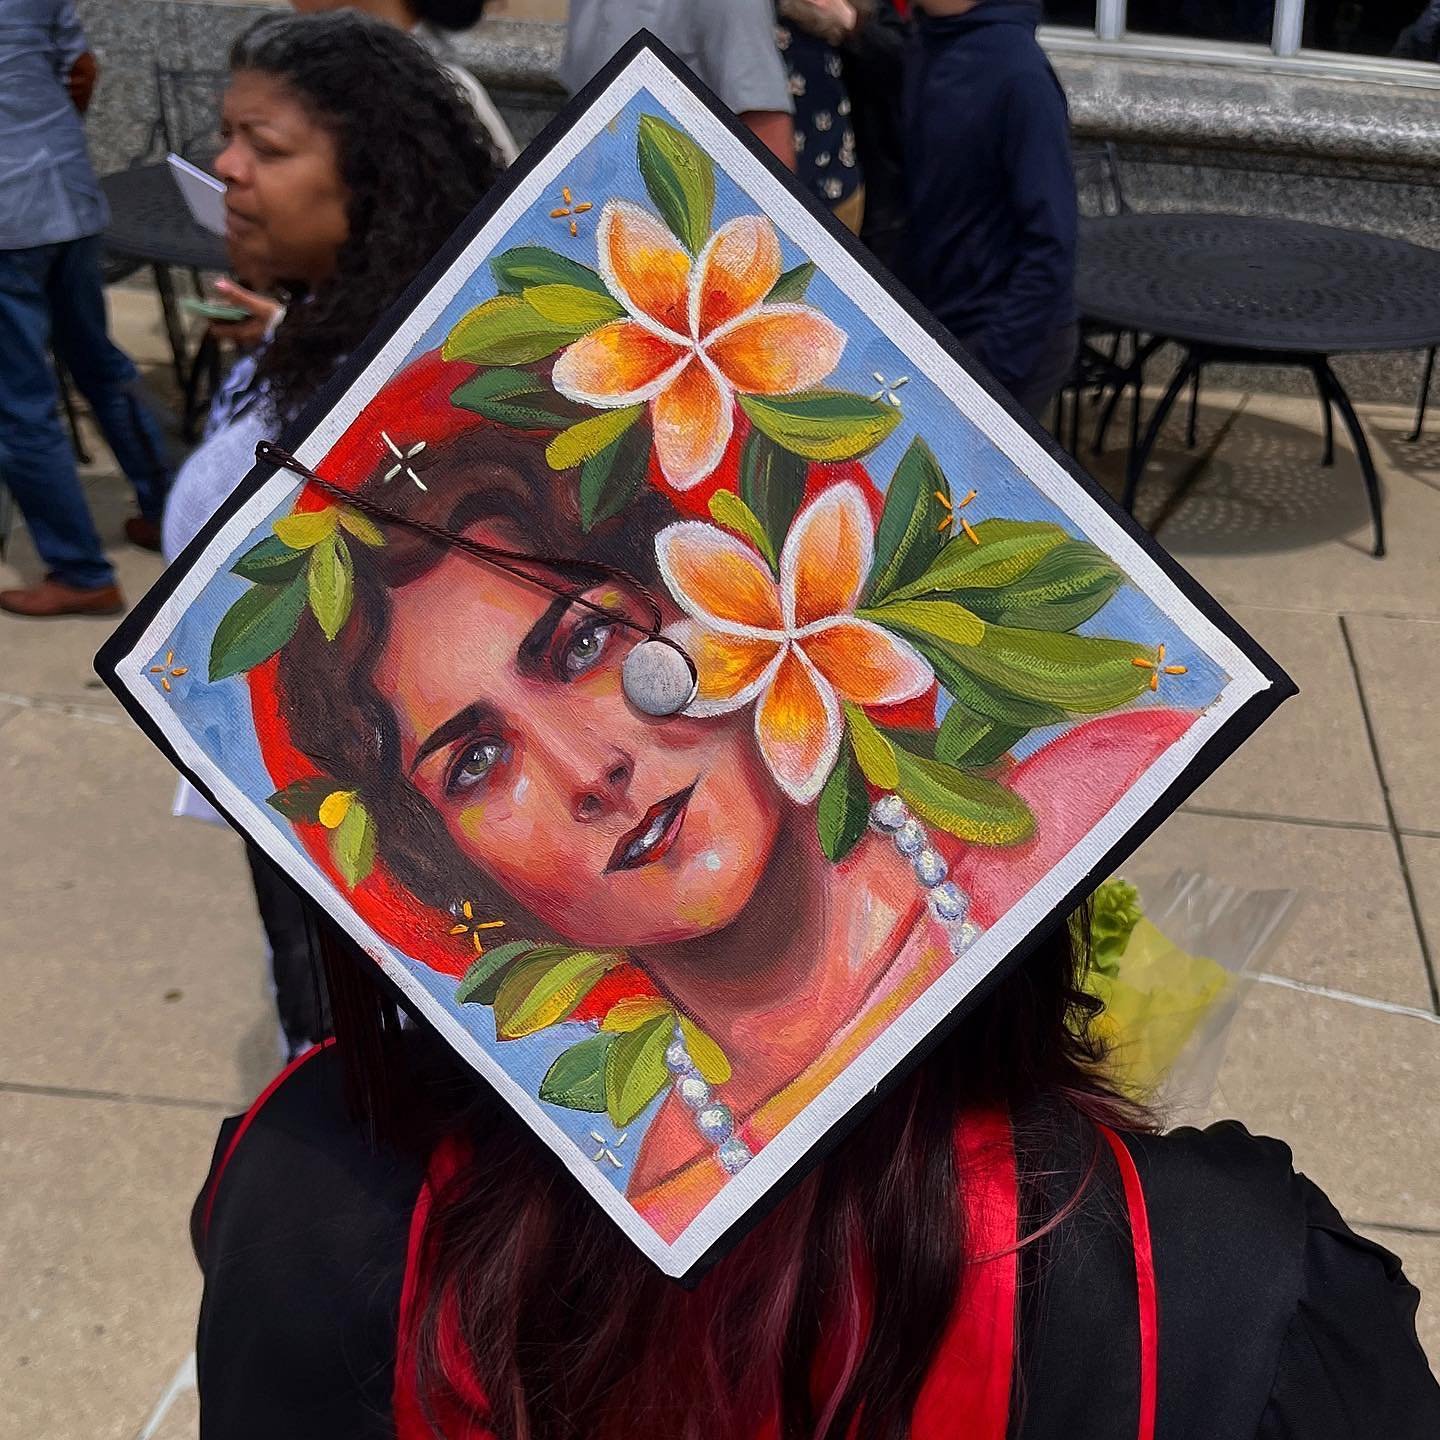 Although I technically graduated in December, I finally got to walk this weekend to celebrate my BFA in Illustration and Minor in Business with Summa Cum Laude honors.

I wanted to quickly share my graduation cap and share a little bit about the stor